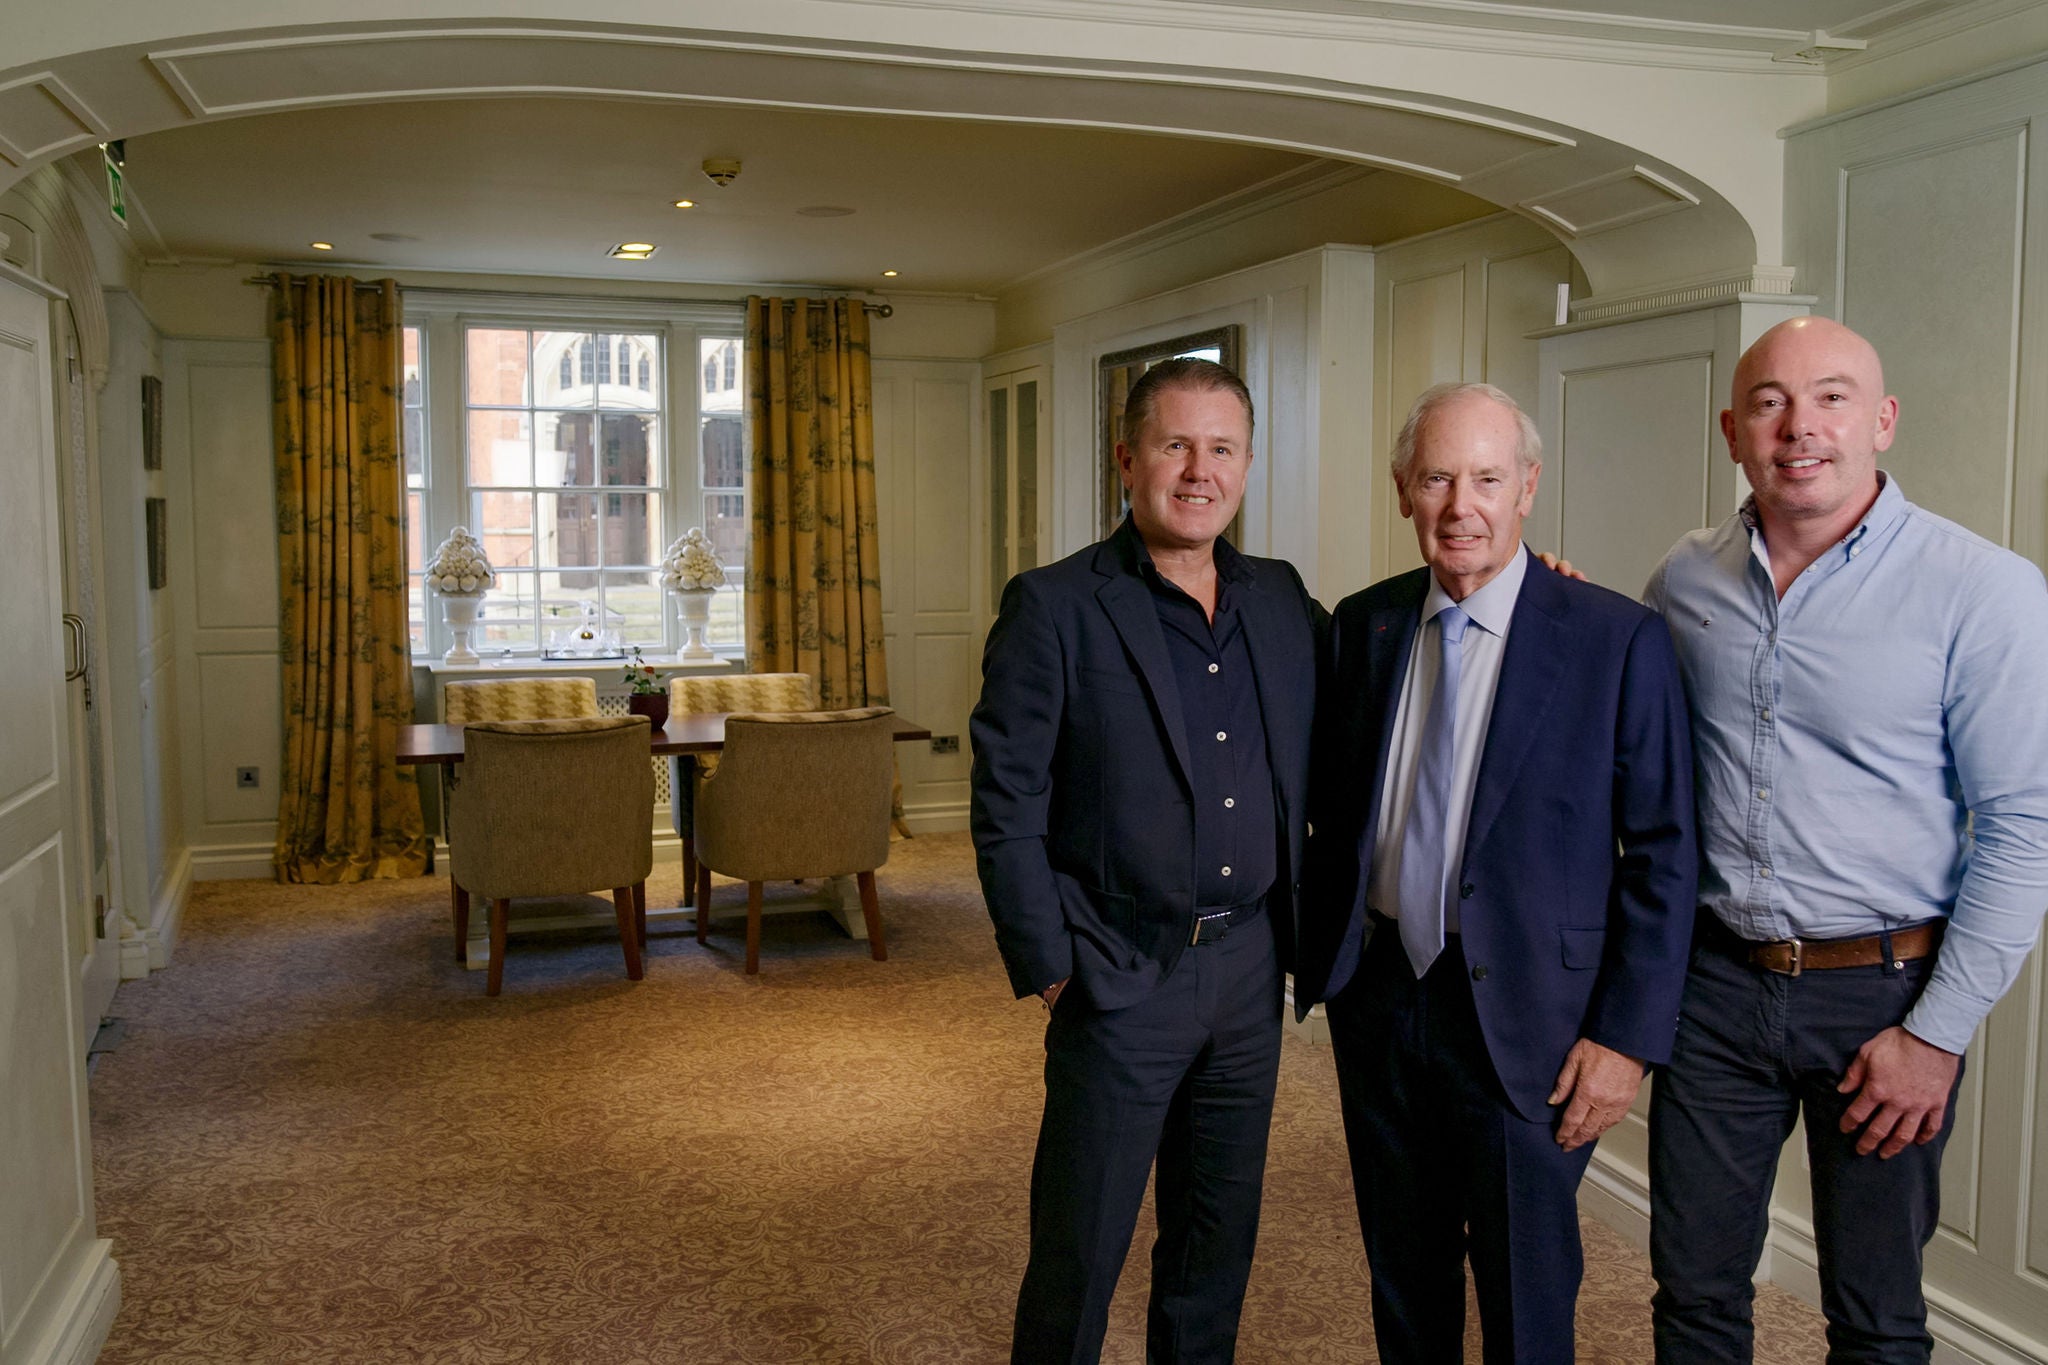 A portrait of James Rigby, Sir Peter Rigby and Steve Rigby in a hotel